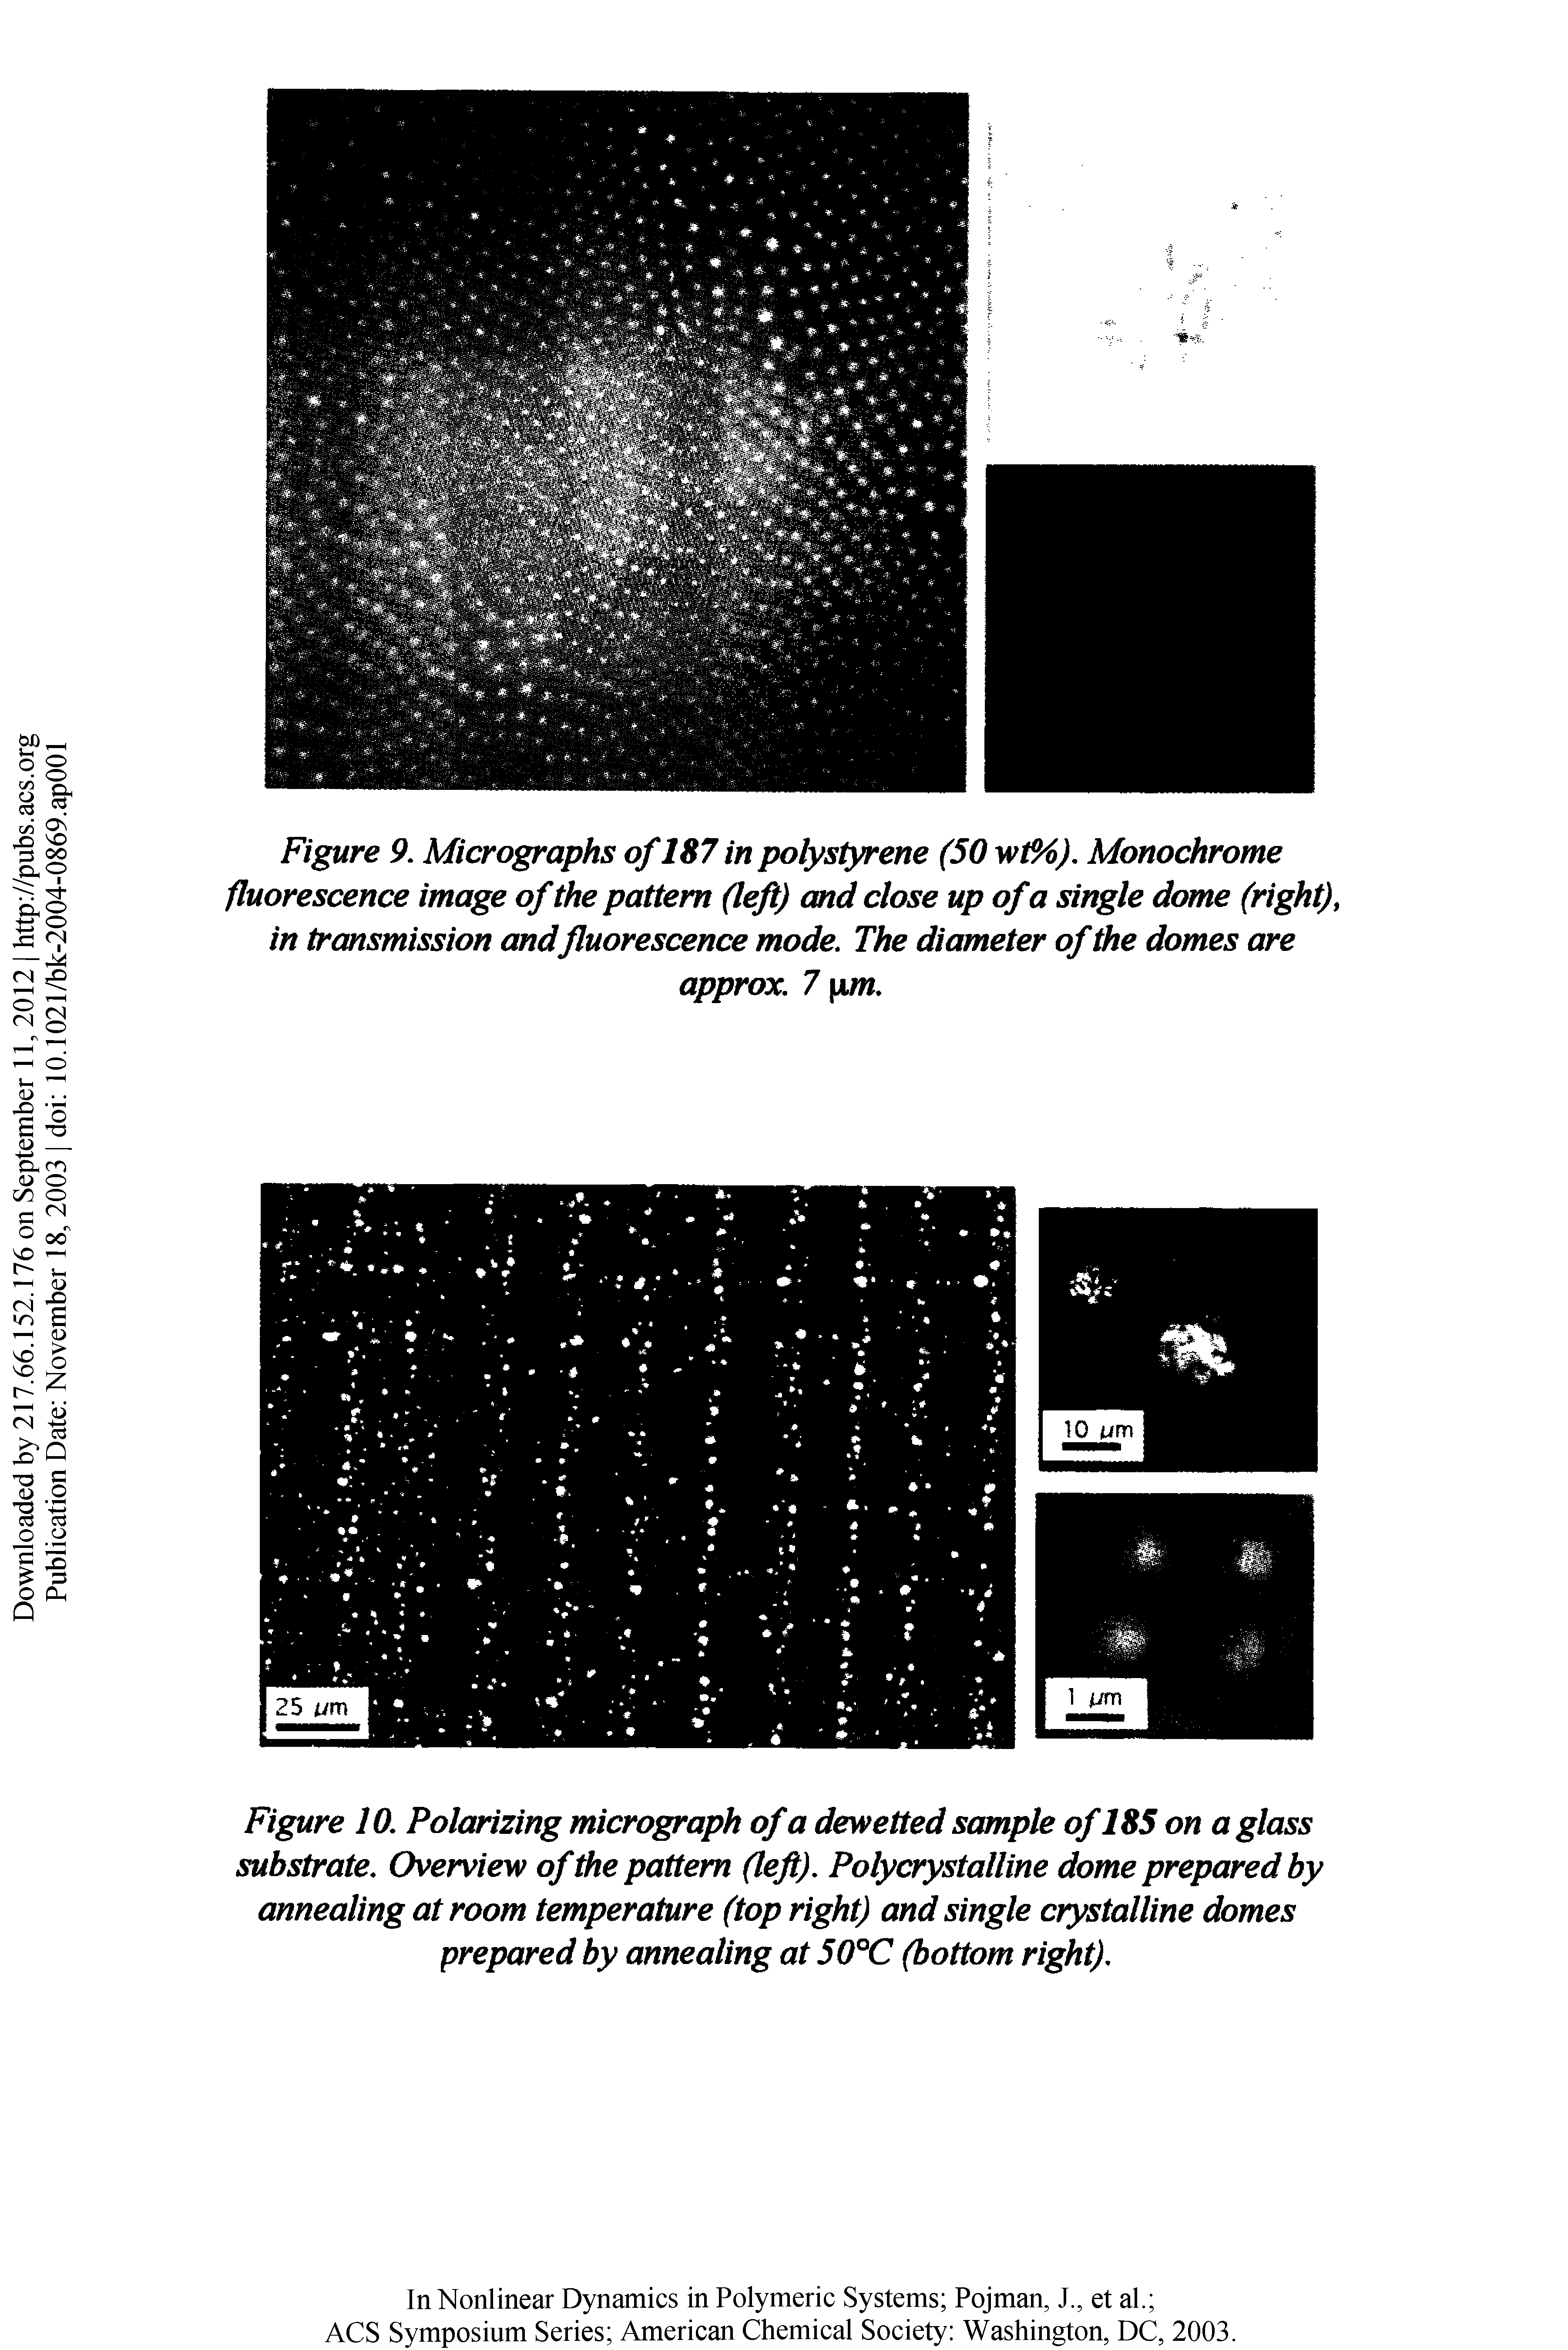 Figure 9. Micrographs of 1S7 in polystyrene (50 wt%). Monochrome fluorescence image of the pattern (left) and close up ofa single dome (right), in transmission andfluorescence mode. The diameter of the domes are...